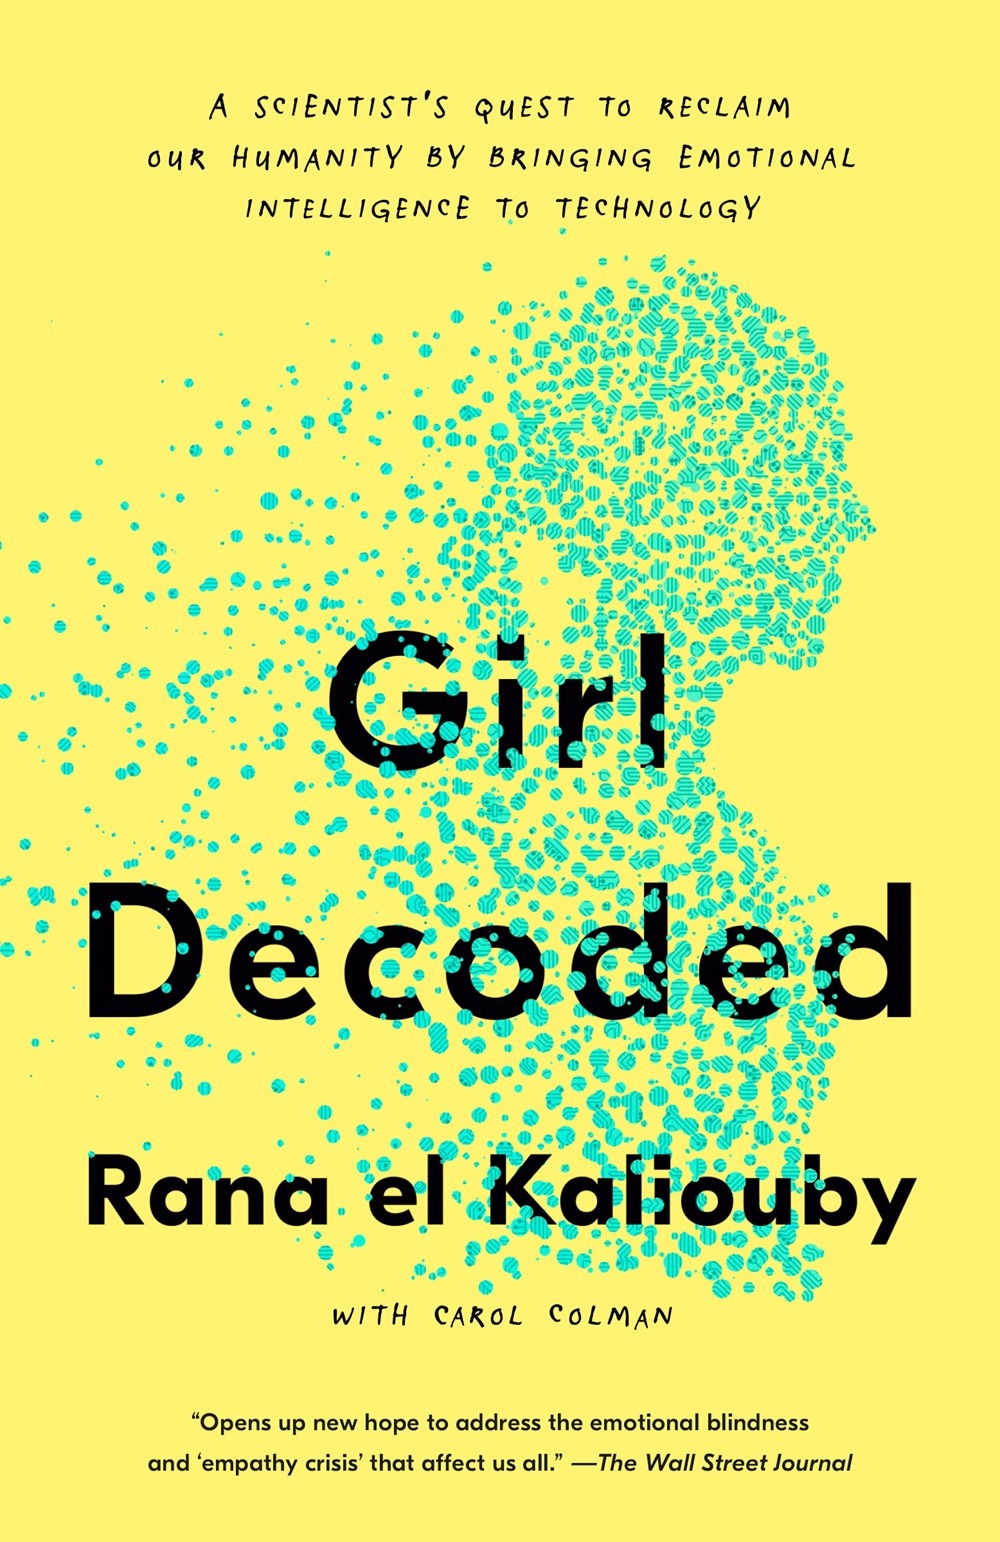 Girl Decoded: A Scientist's Quest to Reclaim Our Humanity by Bringing Emotional Intelligence to Technology